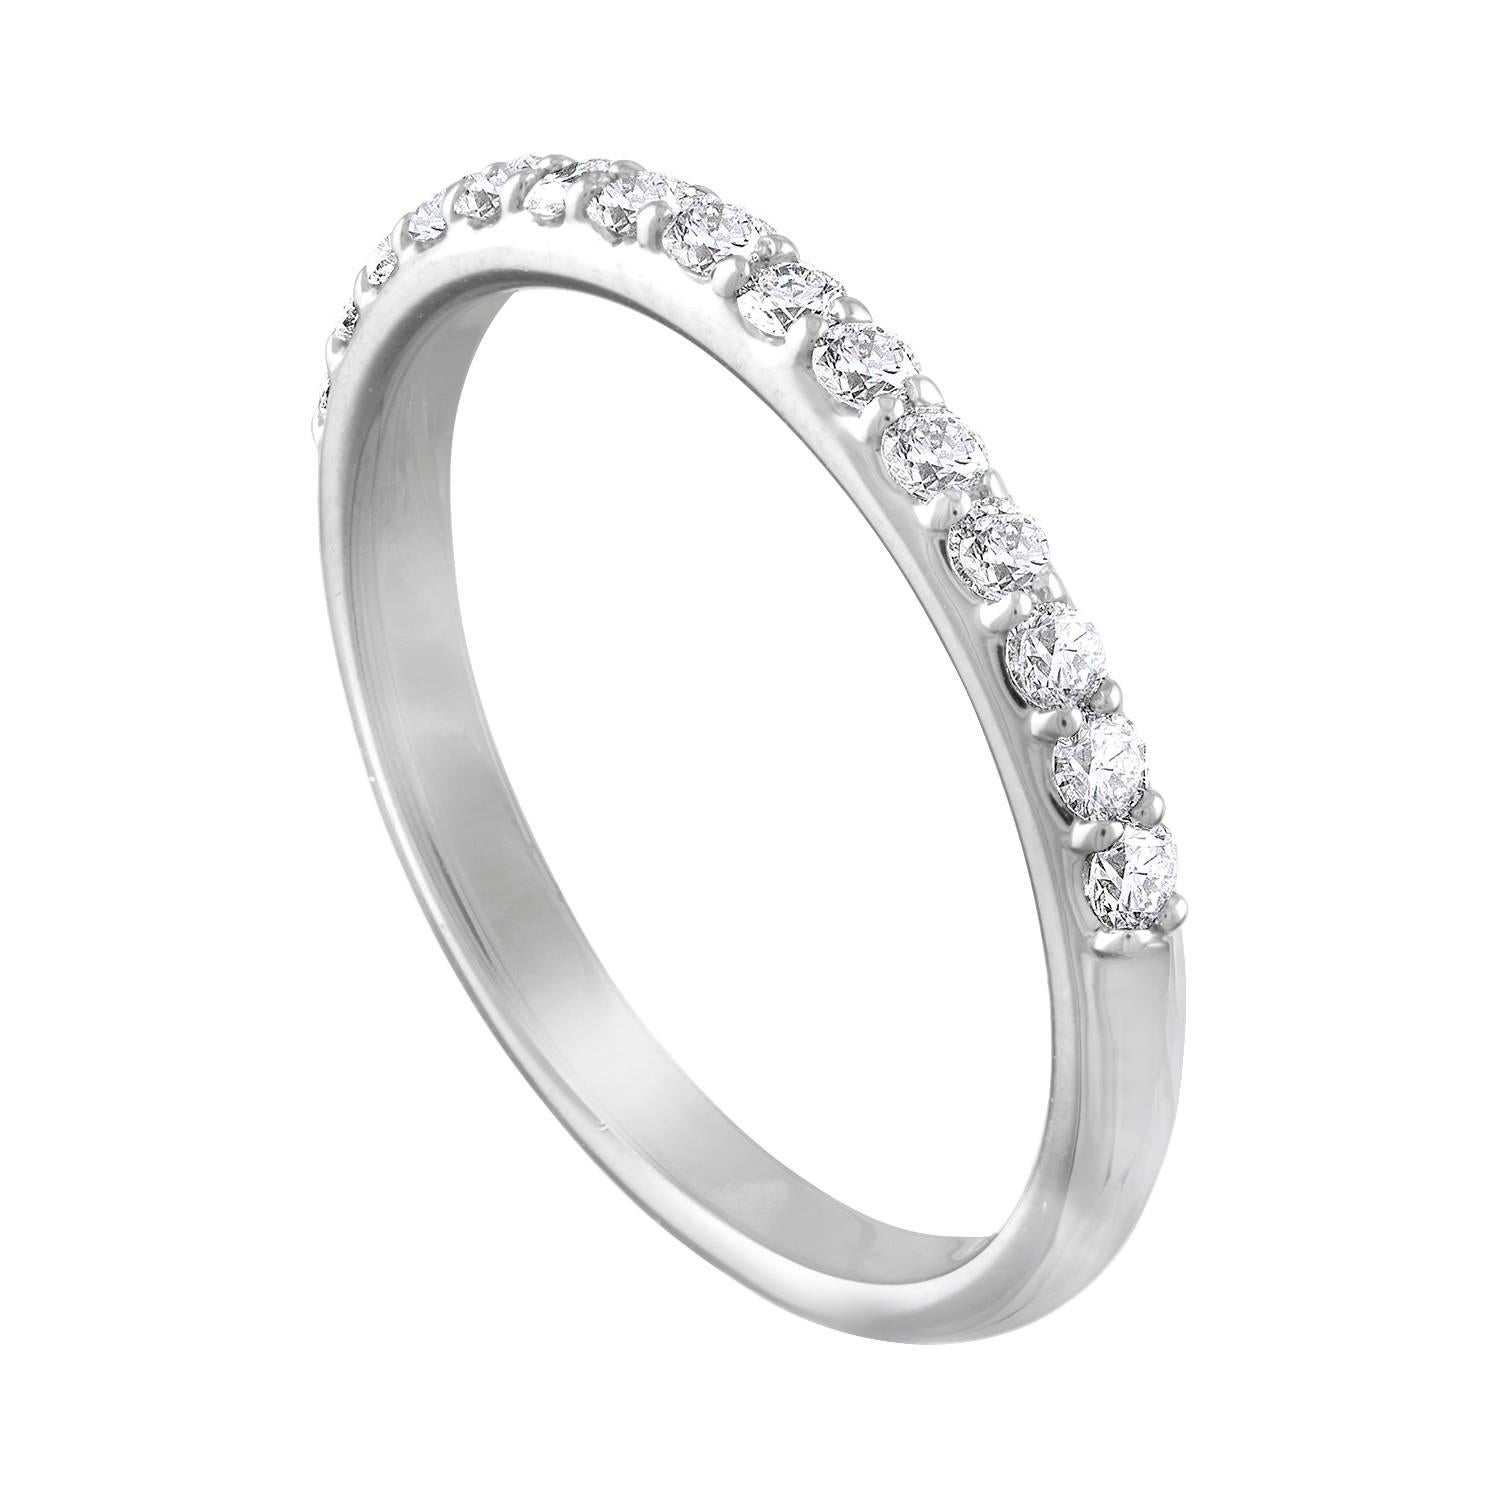 Very Classic Half Band Ring.
The ring is Platinum.
There are 0.40 Carats in Diamonds F VS.
The ring is size 7, sizable.
The ring weighs 3.6 grams.